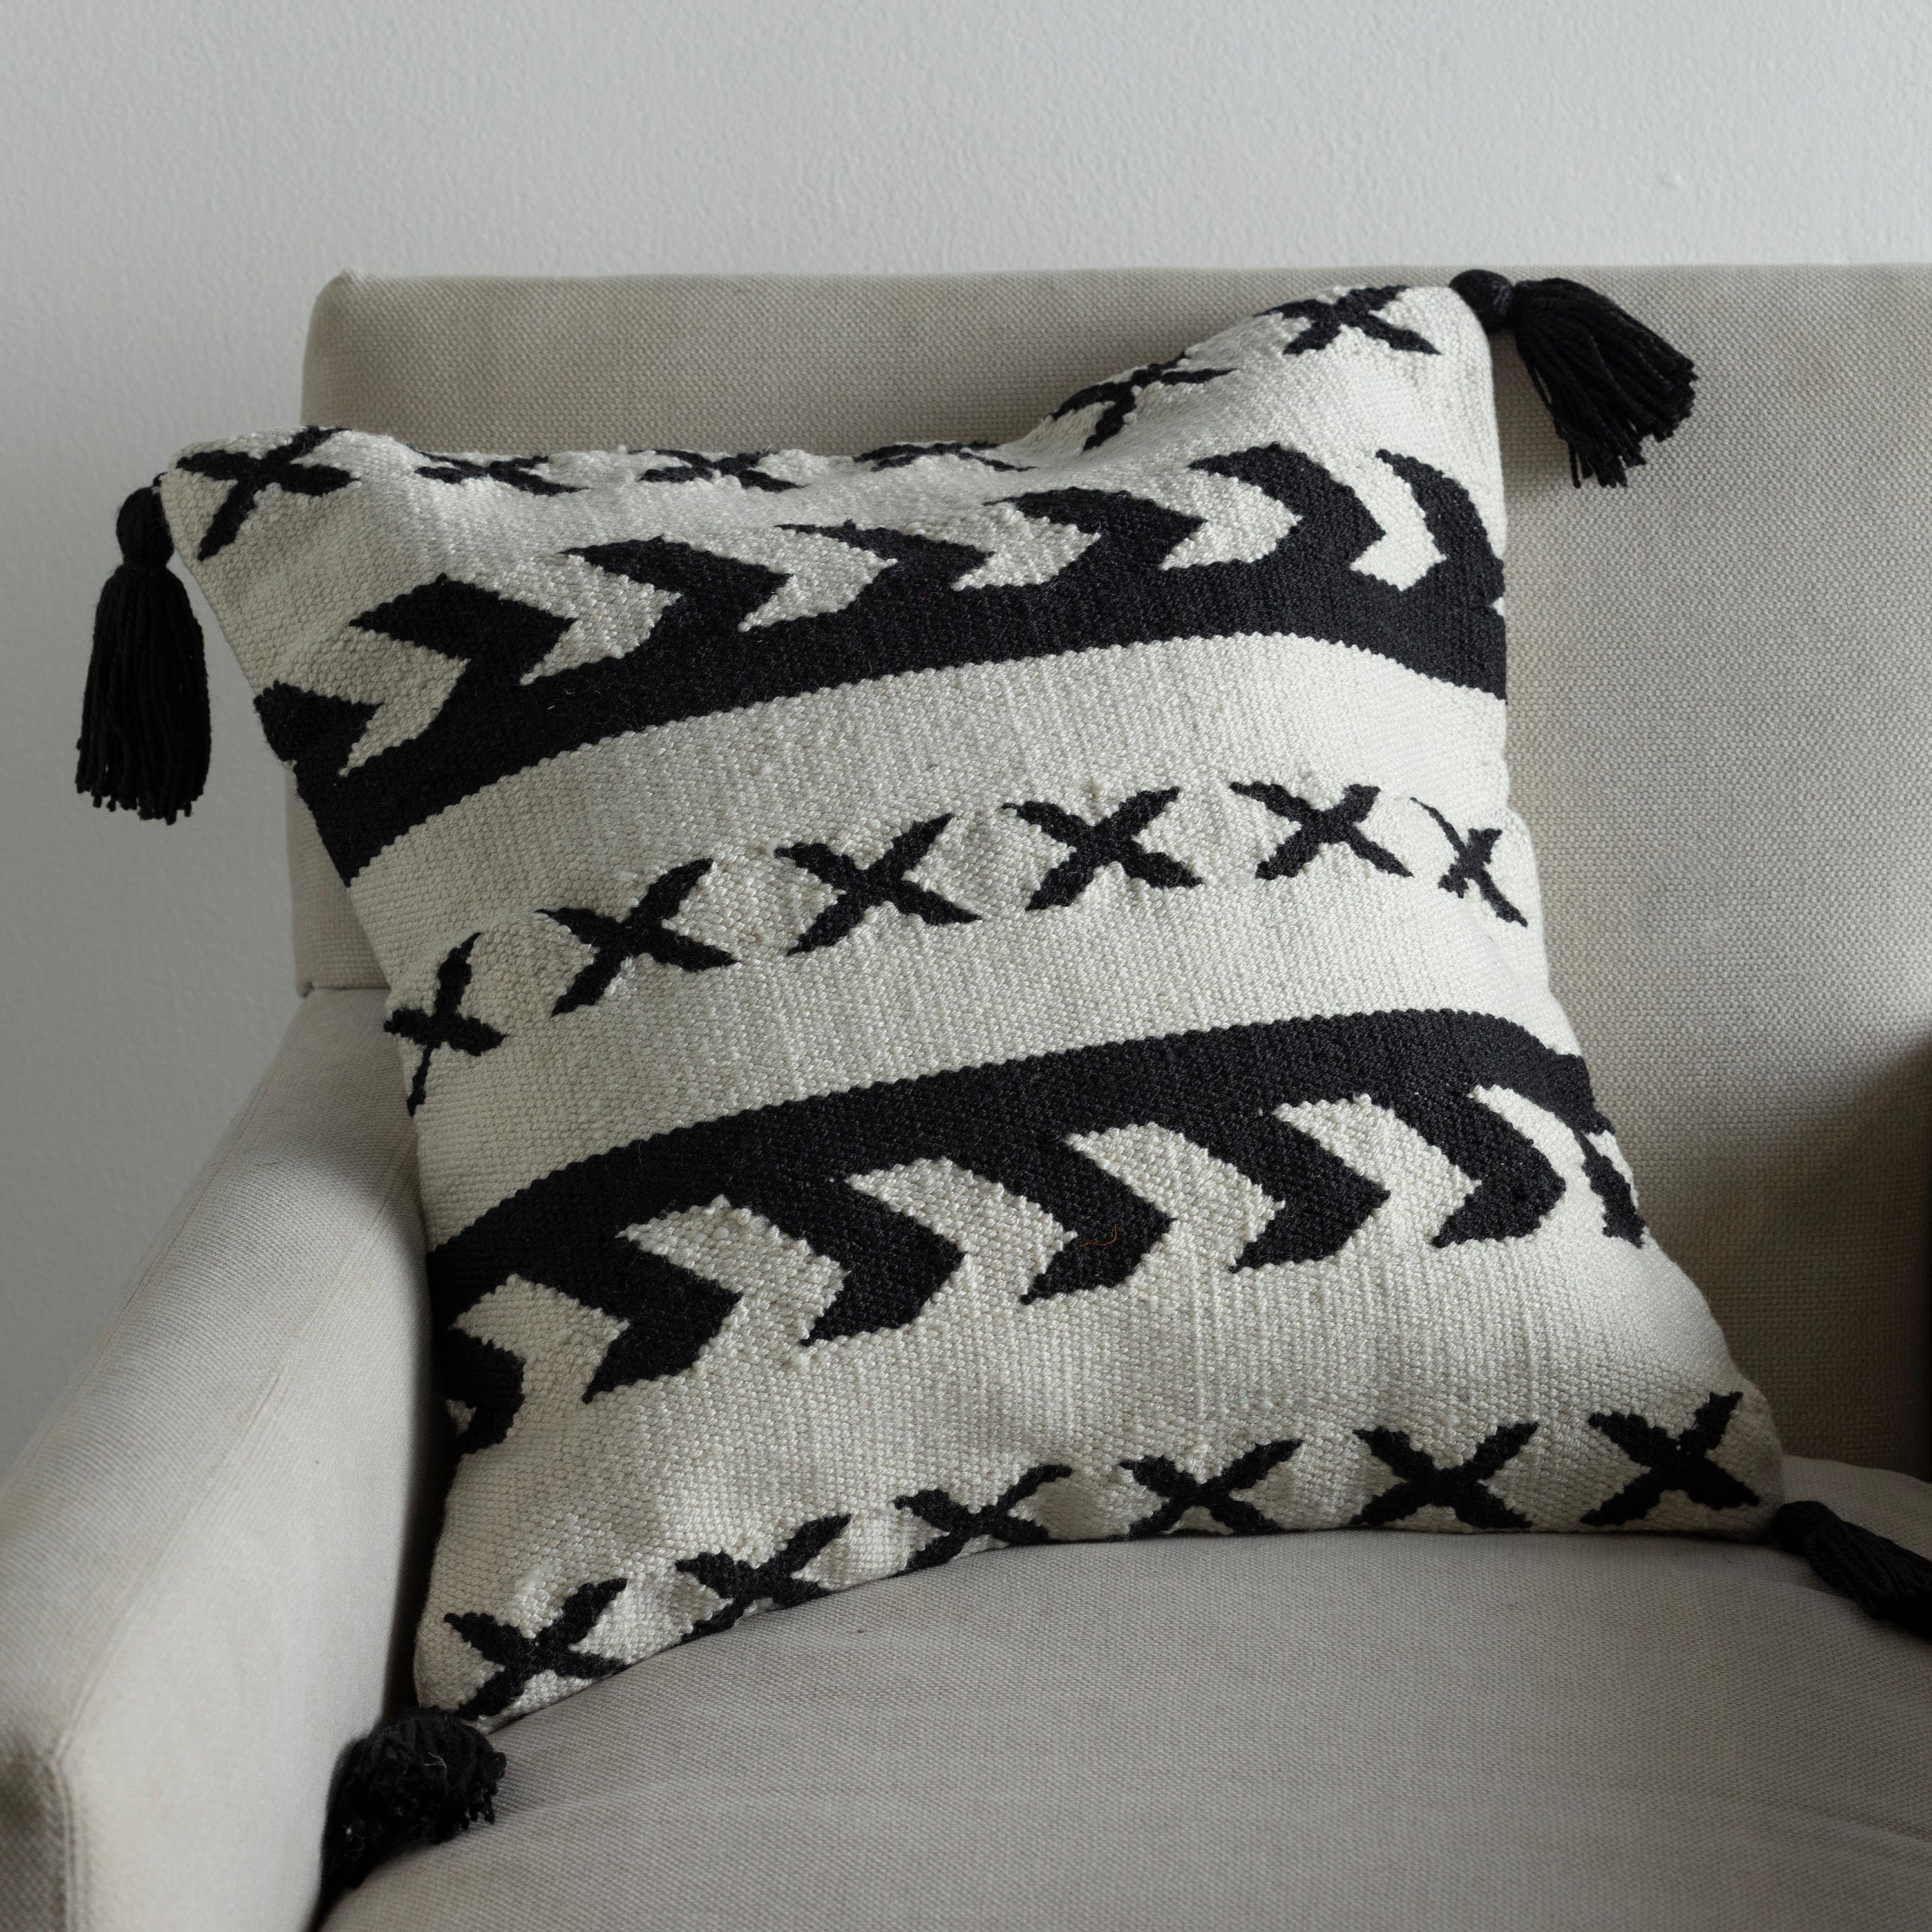 Black and White Geo Print Tasseled Outdoor 22" Square Throw Pillow